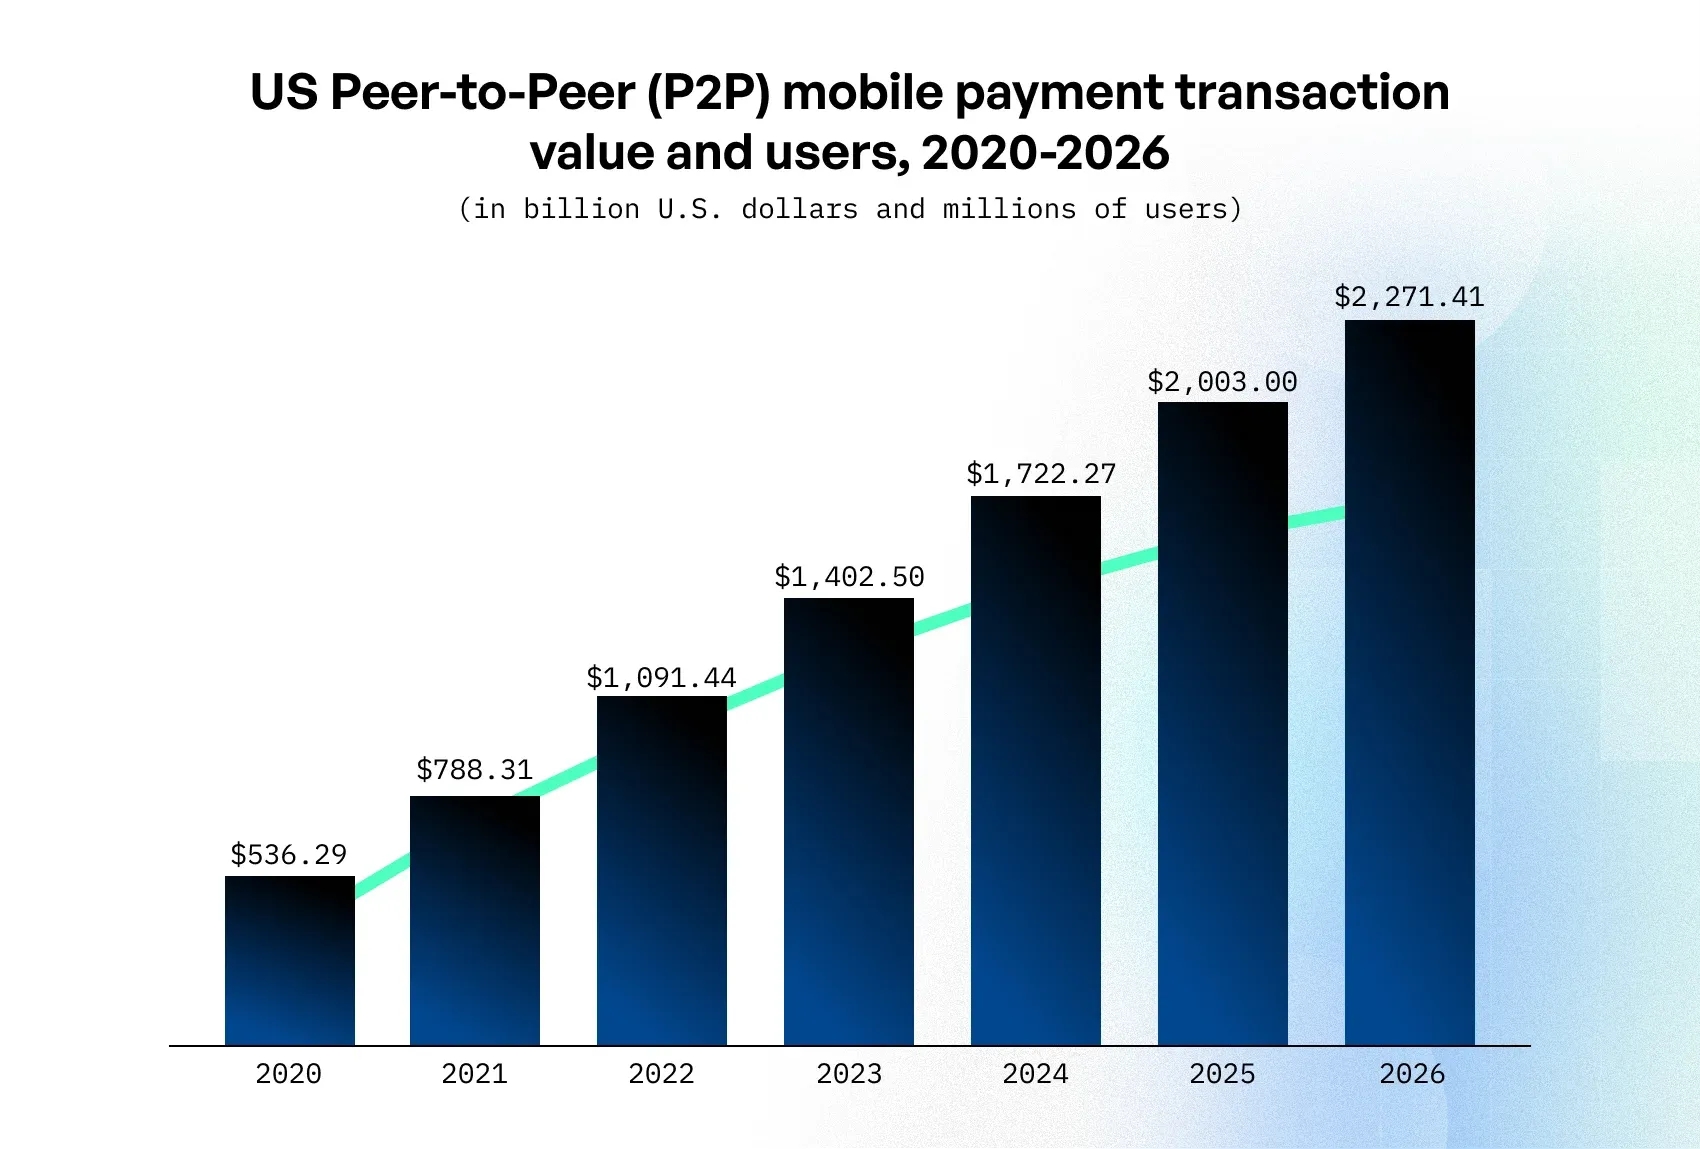 US Peer-to-Peer (P2P) mobile payment transaction value and users, 2020-2026.webp